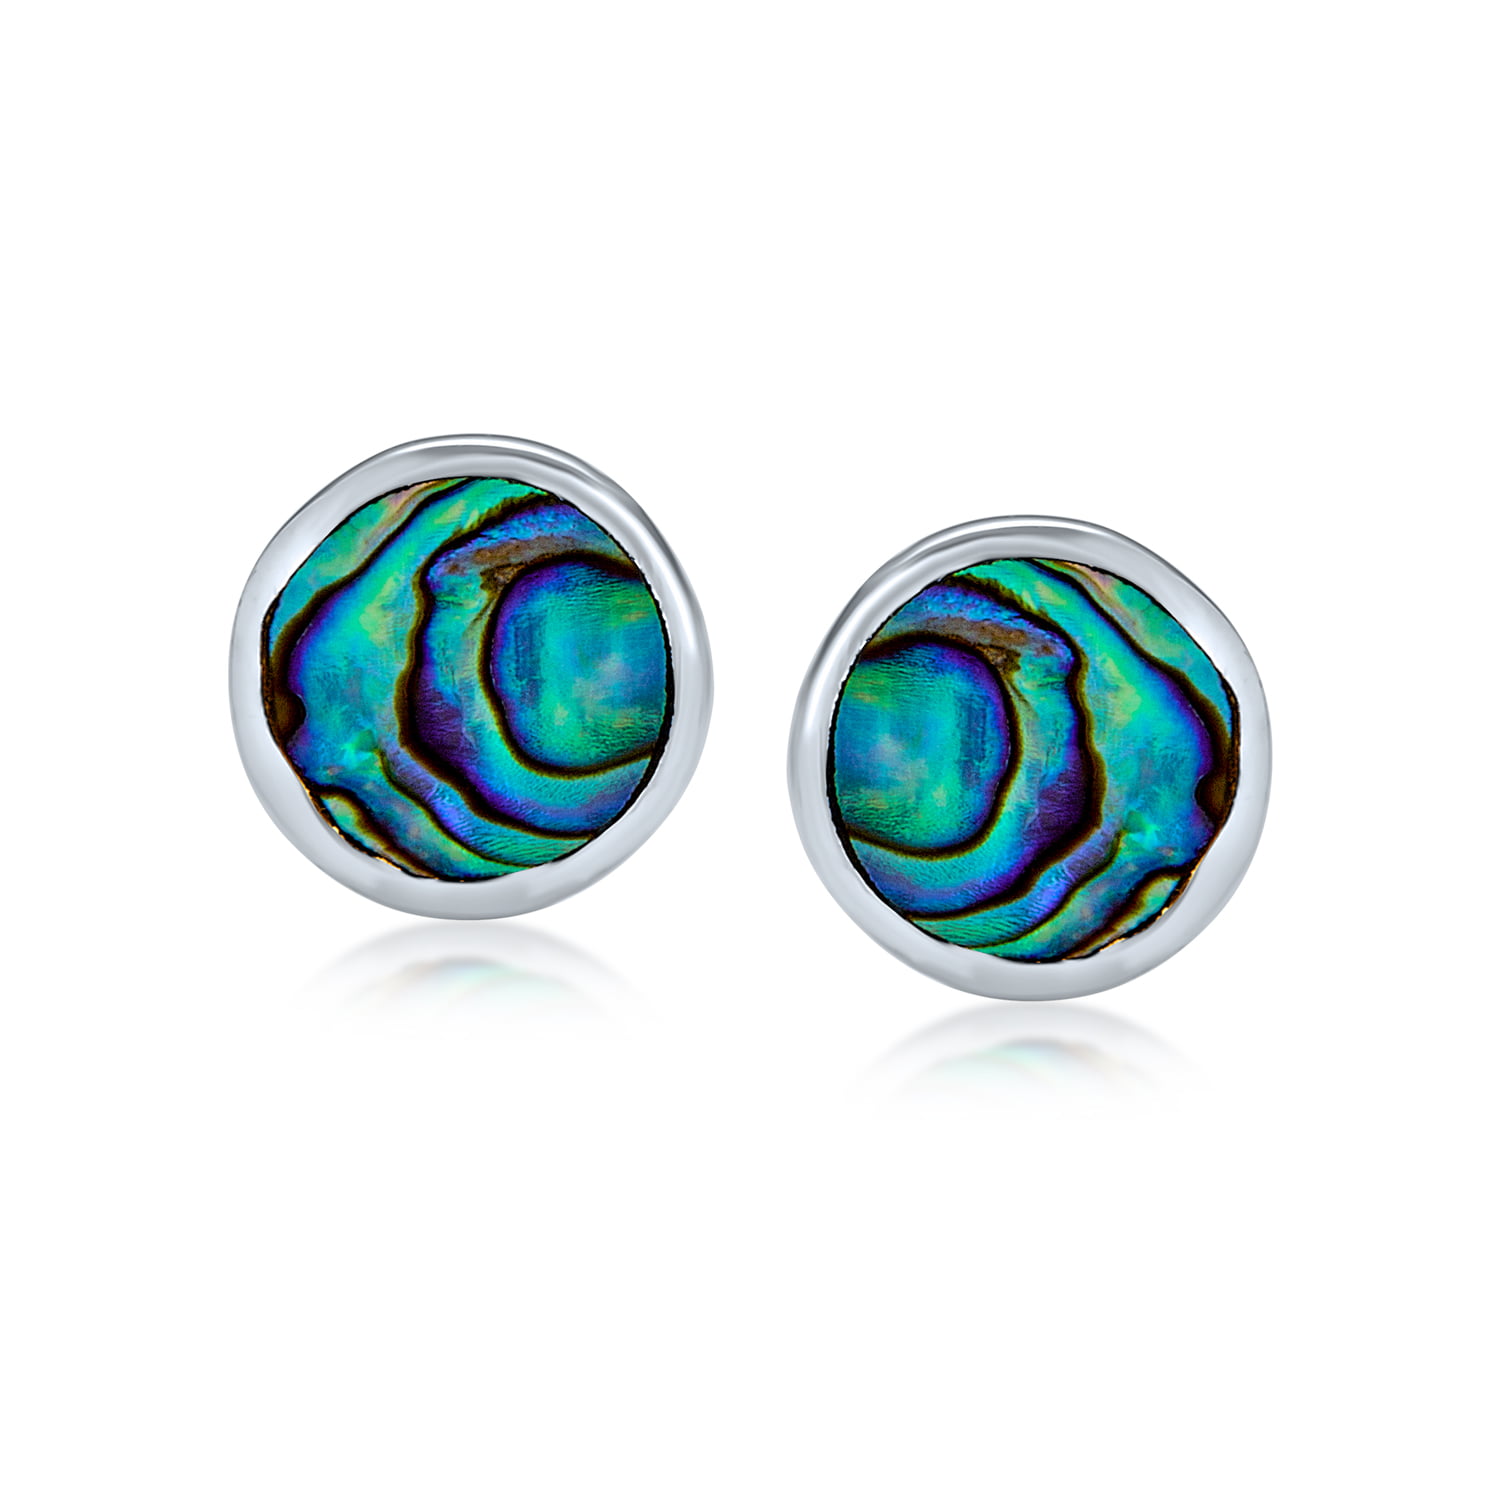 Details about   Abalone Shell 925 Sterling Silver  Stud Earrings Gift Boxed 